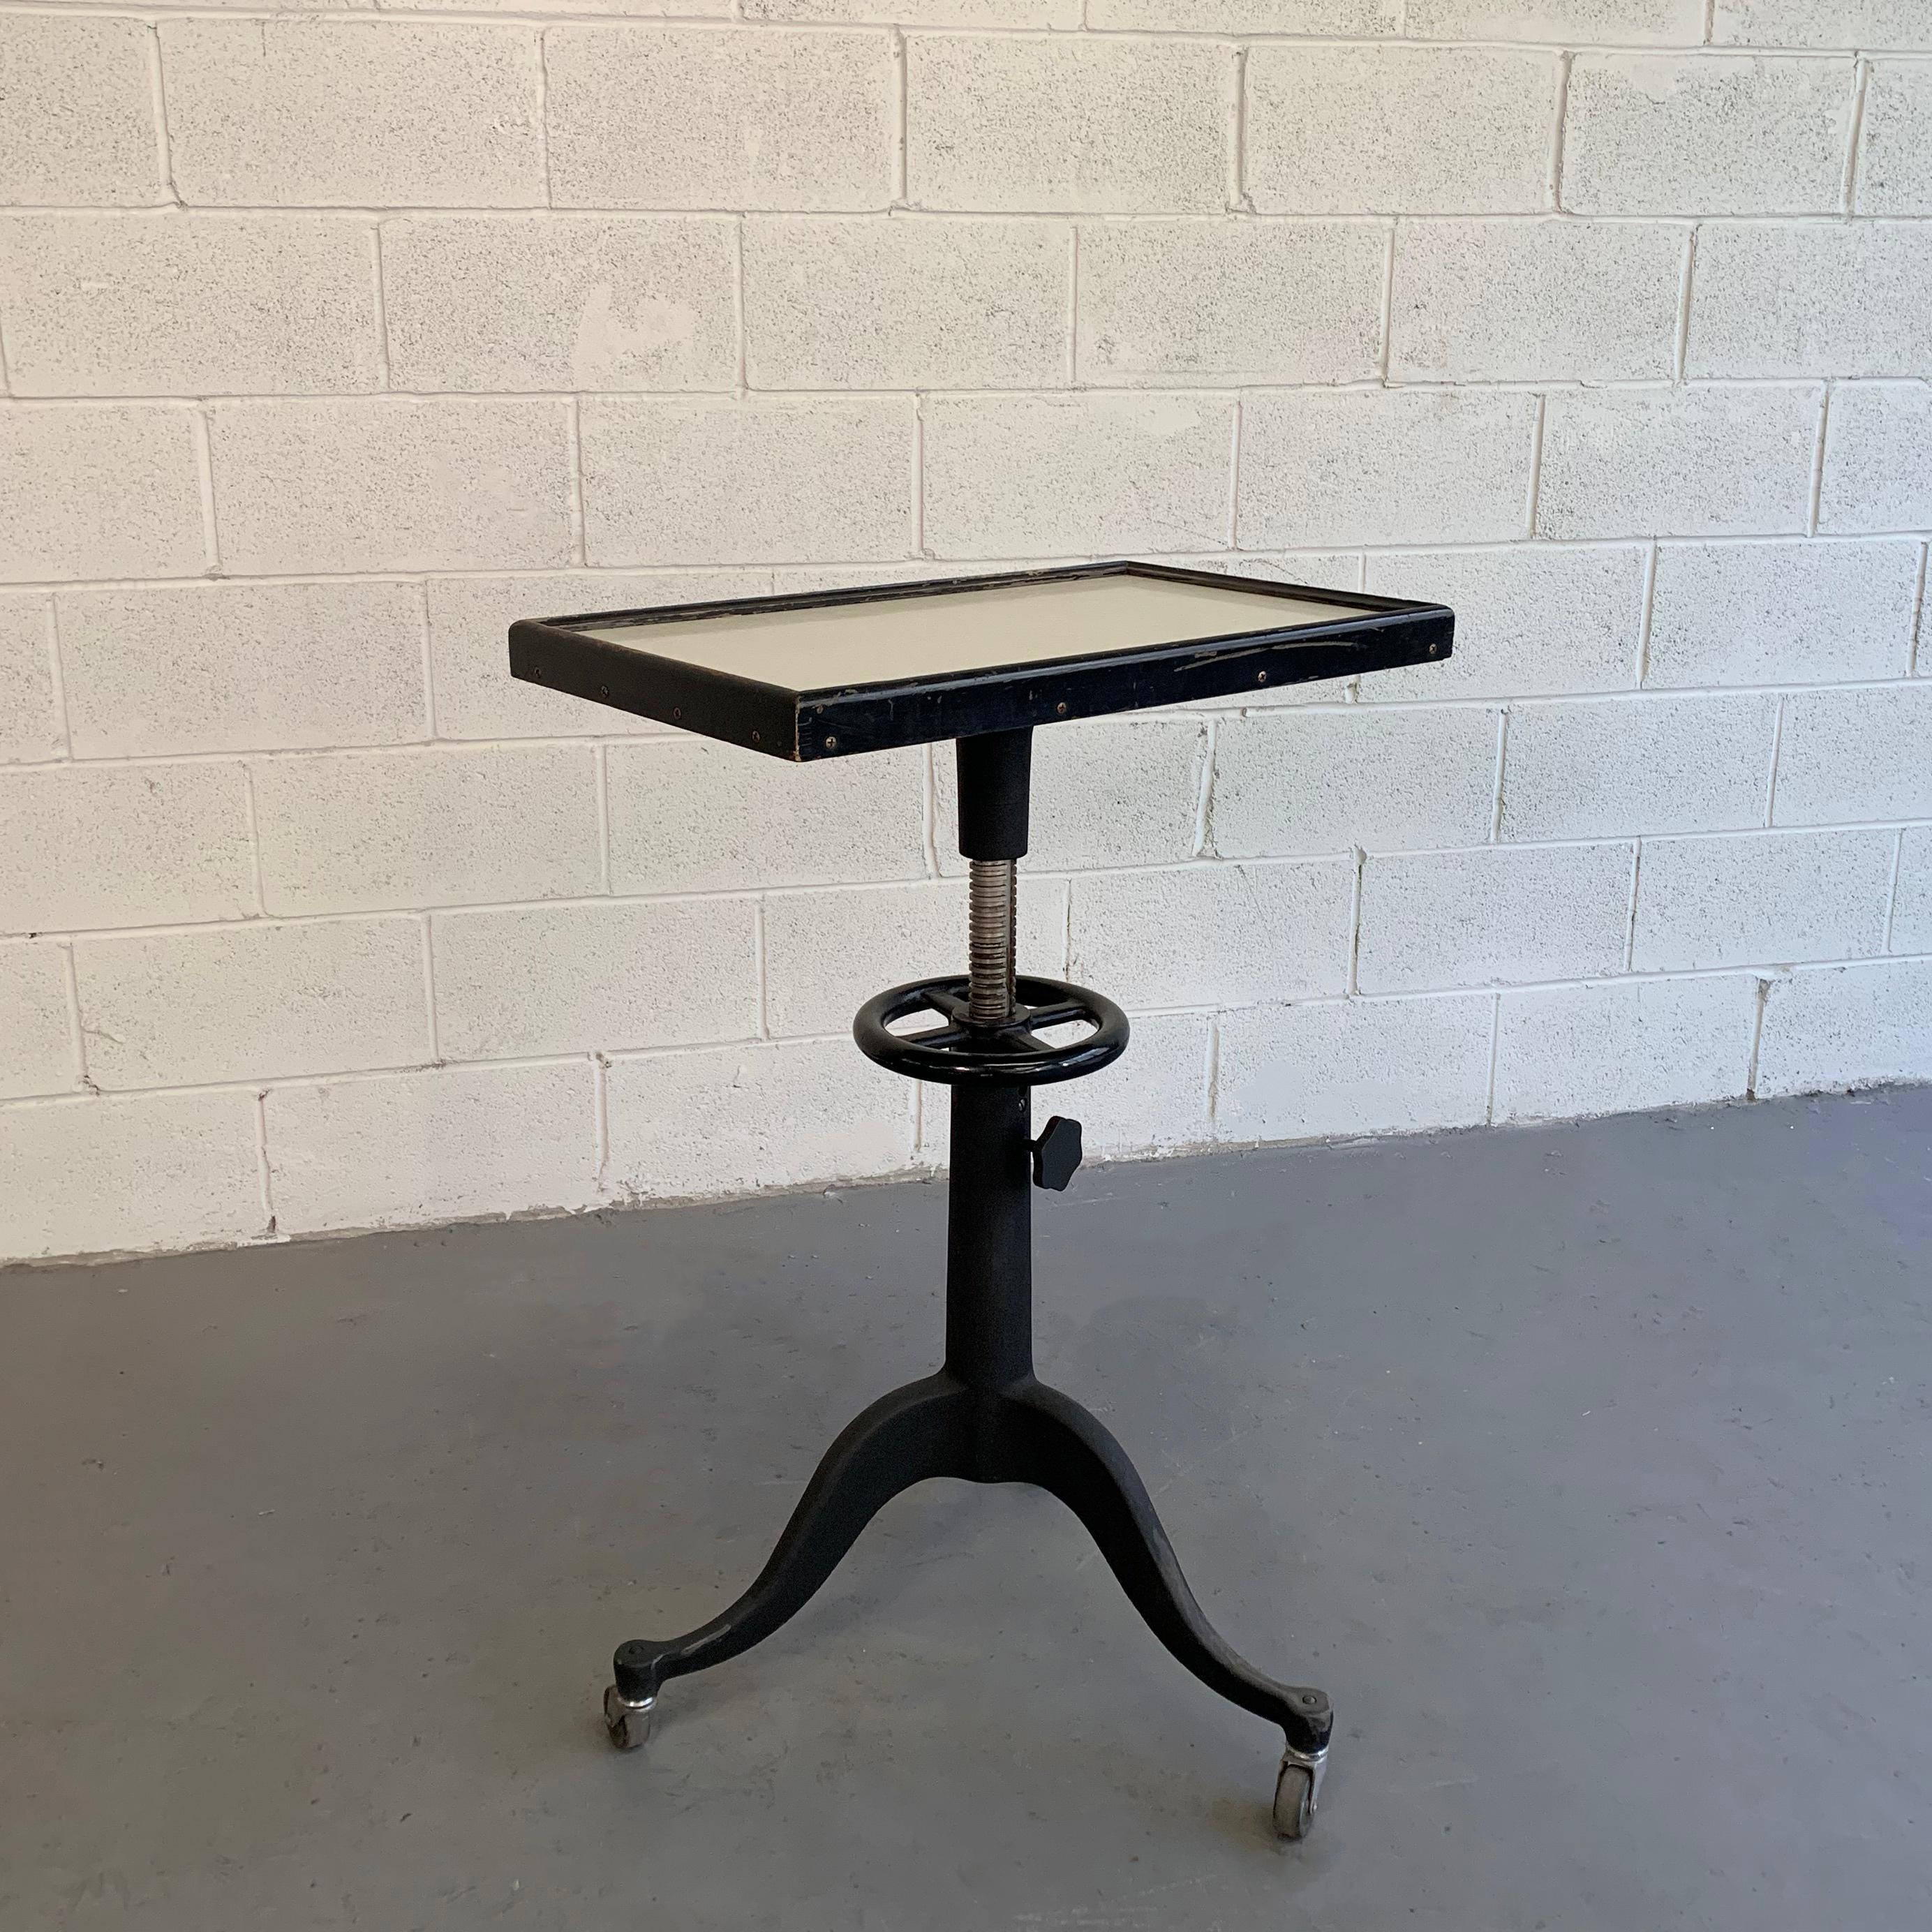 Industrial, optometry examination, table by Bausch & Lomb features a formica top in a wood frame atop a pedestal, cast iron and steel base that is height-adjustable from 31 - 36 inches.